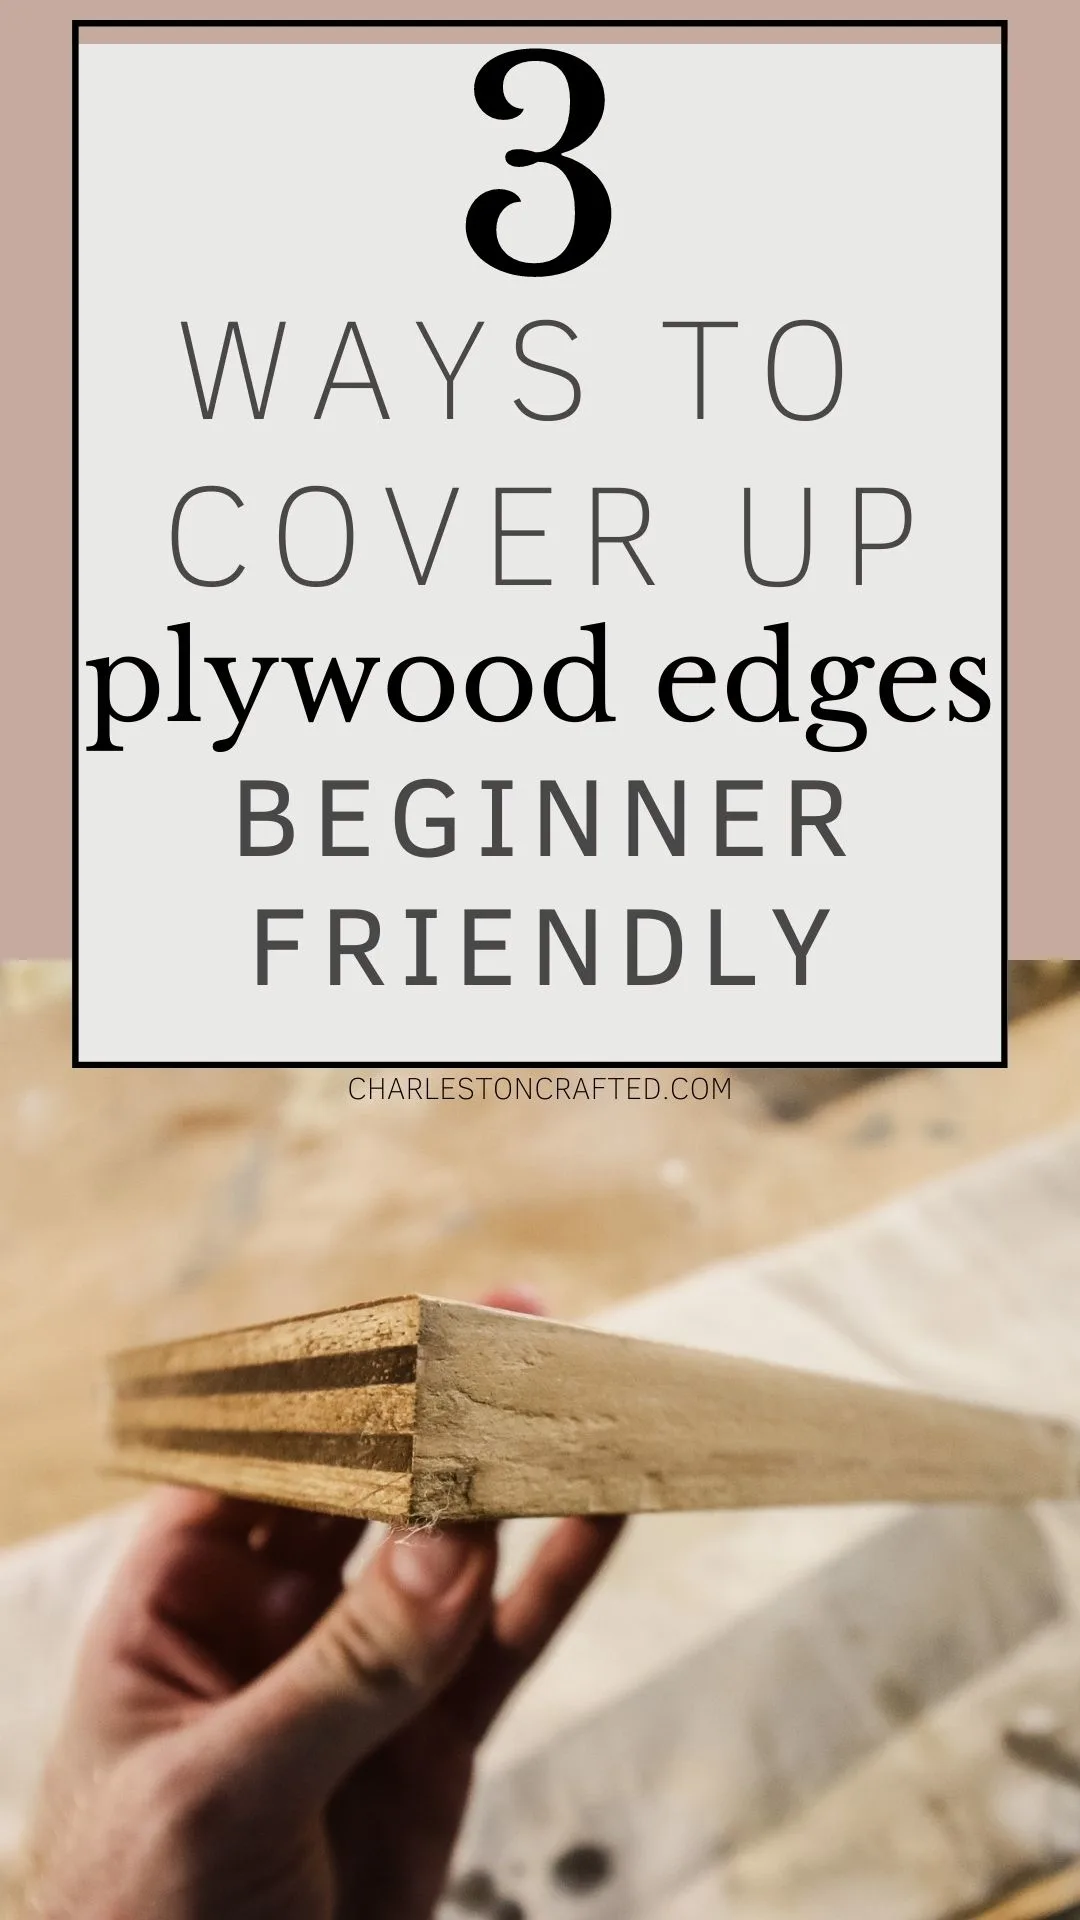 3 ways to cover up plywood edges